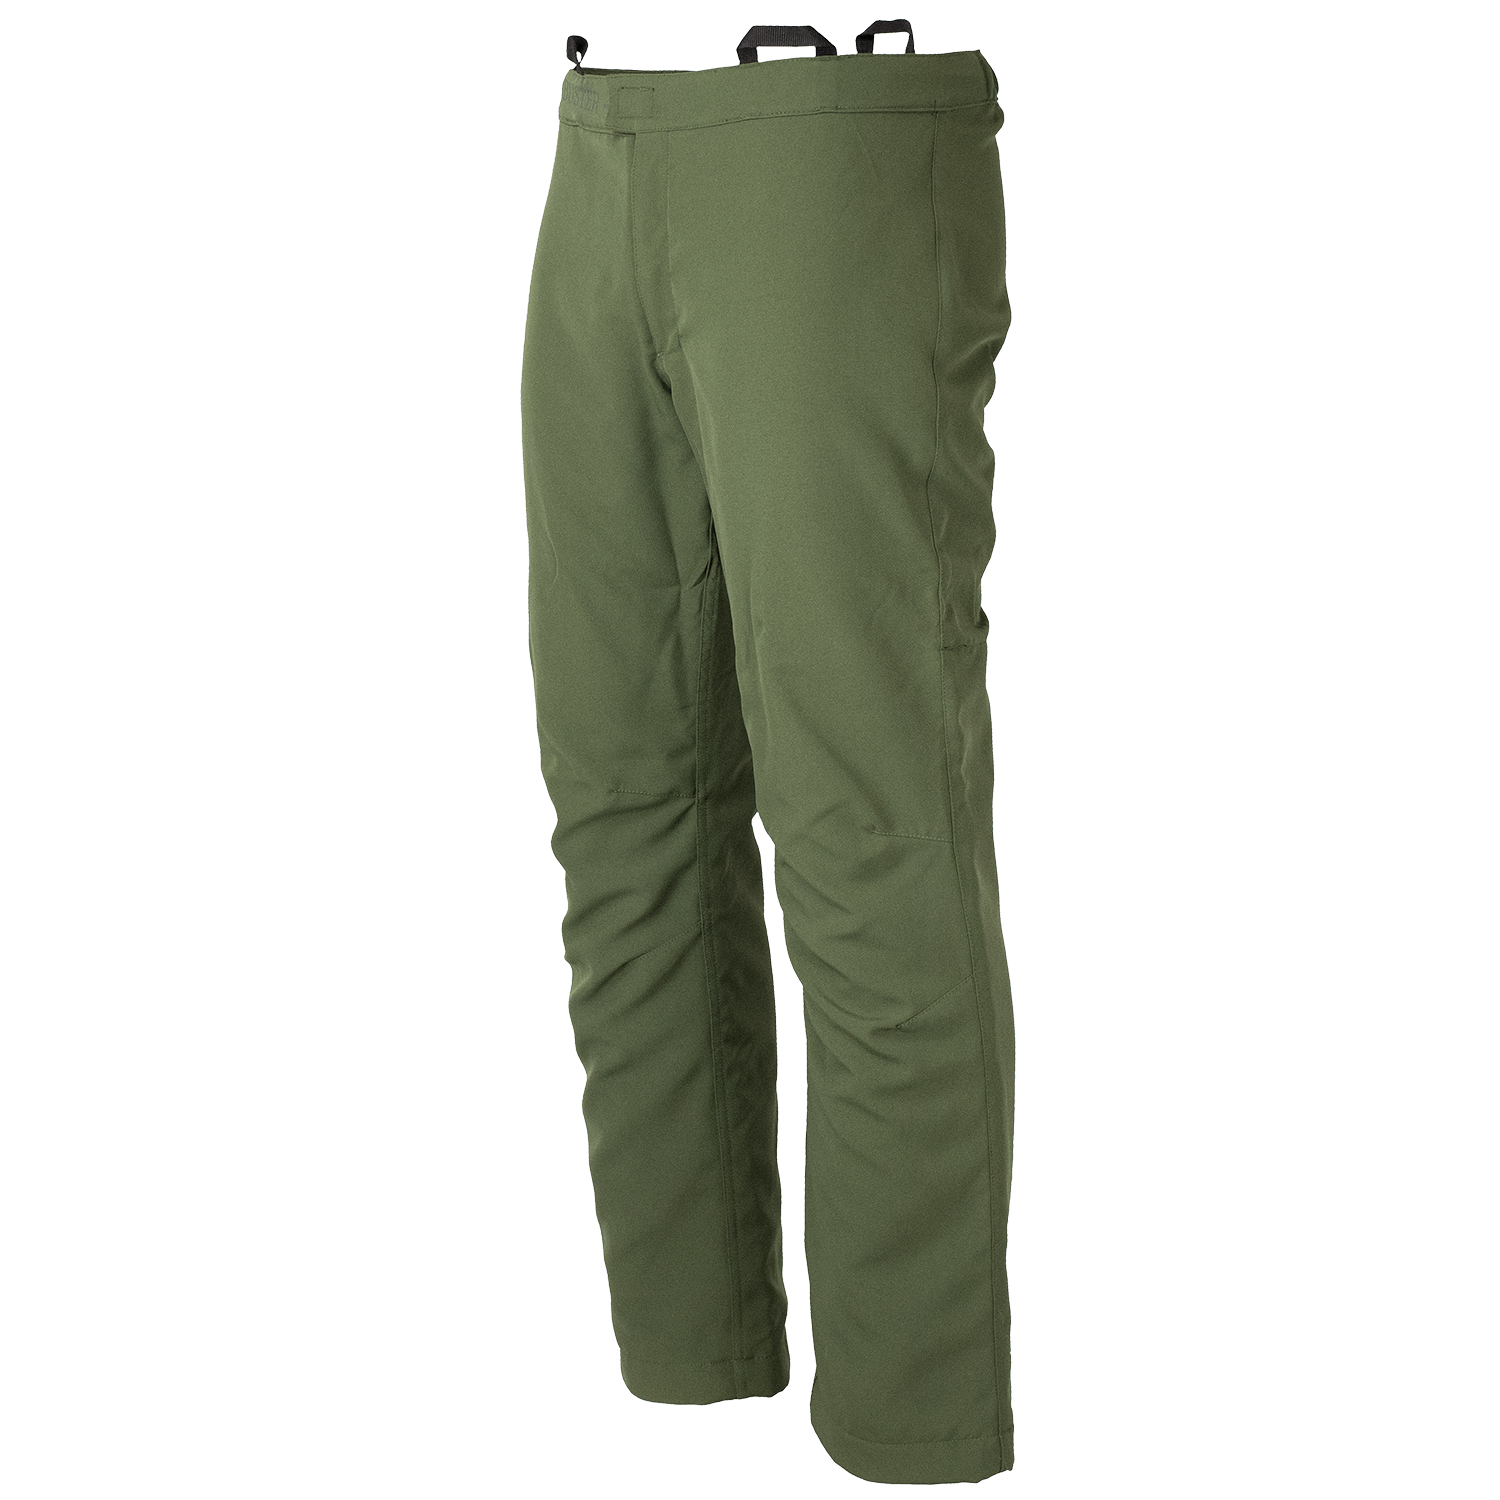 Pirscher Gear Boarbuster Protective Underpants - Shop by Activity